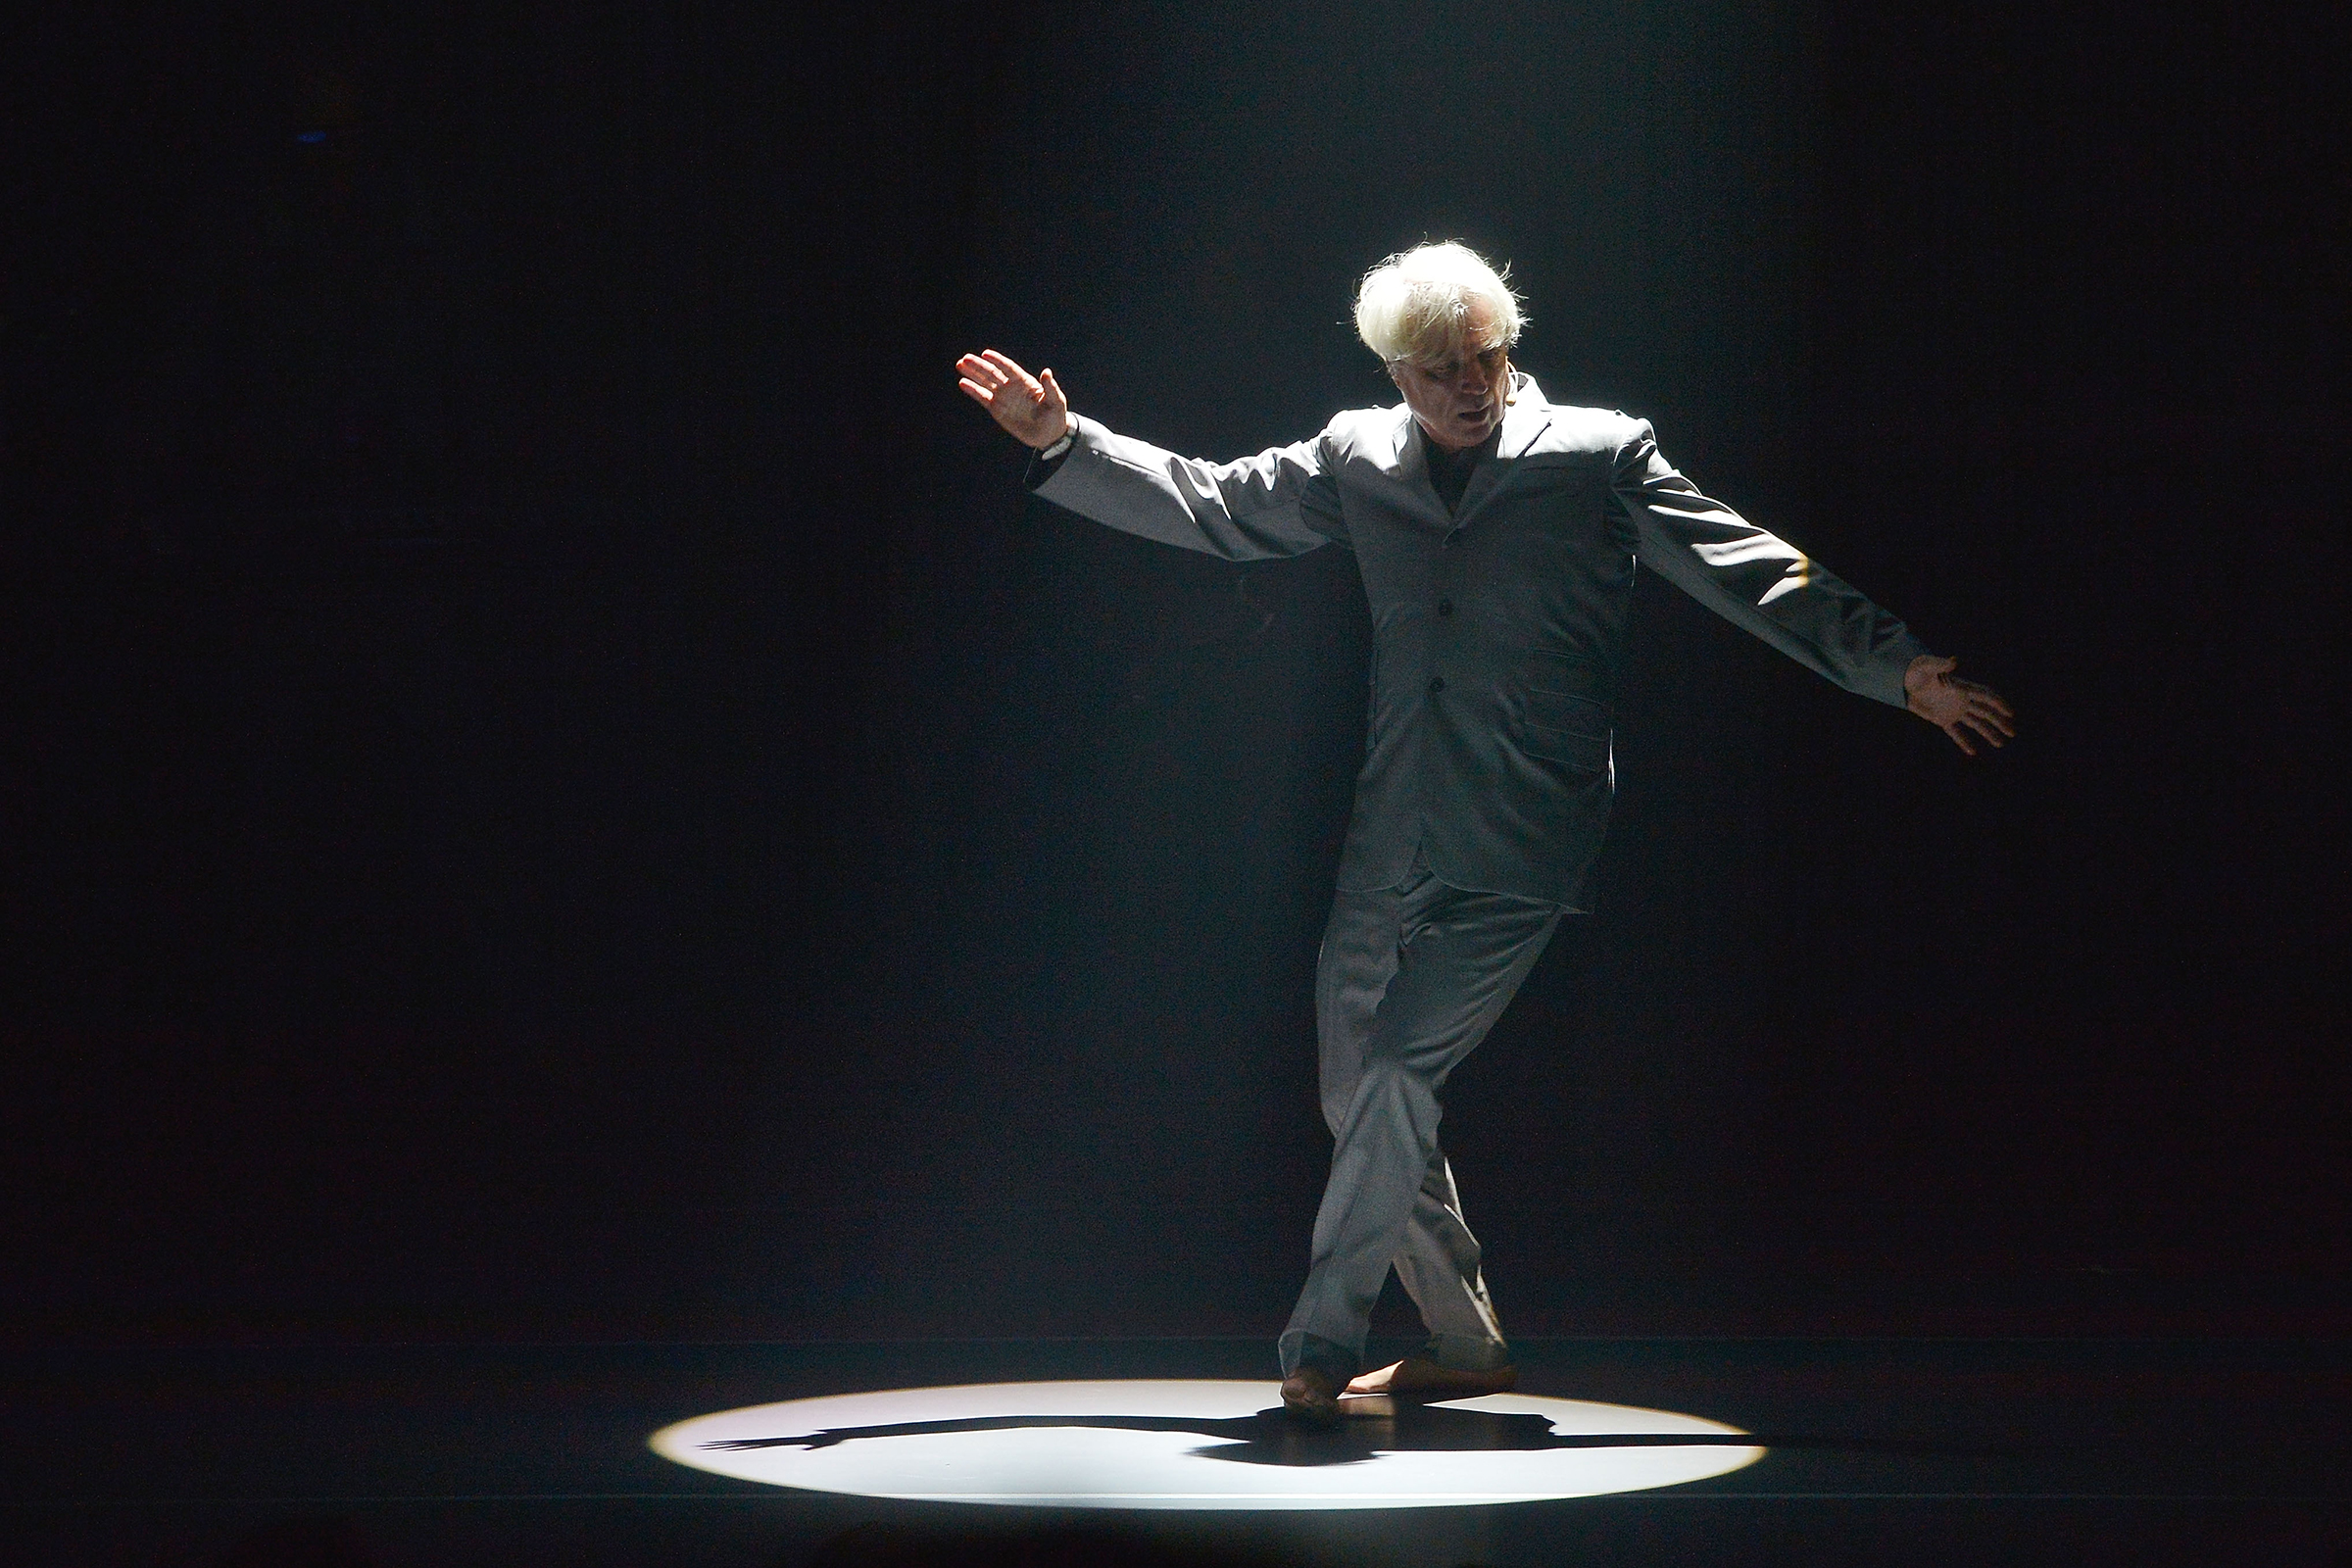 David Byrne performs live on stage during the first night of the European leg of his 'American Utopia' tour, at New Theatre on June 14, 2018 in Oxford, England.